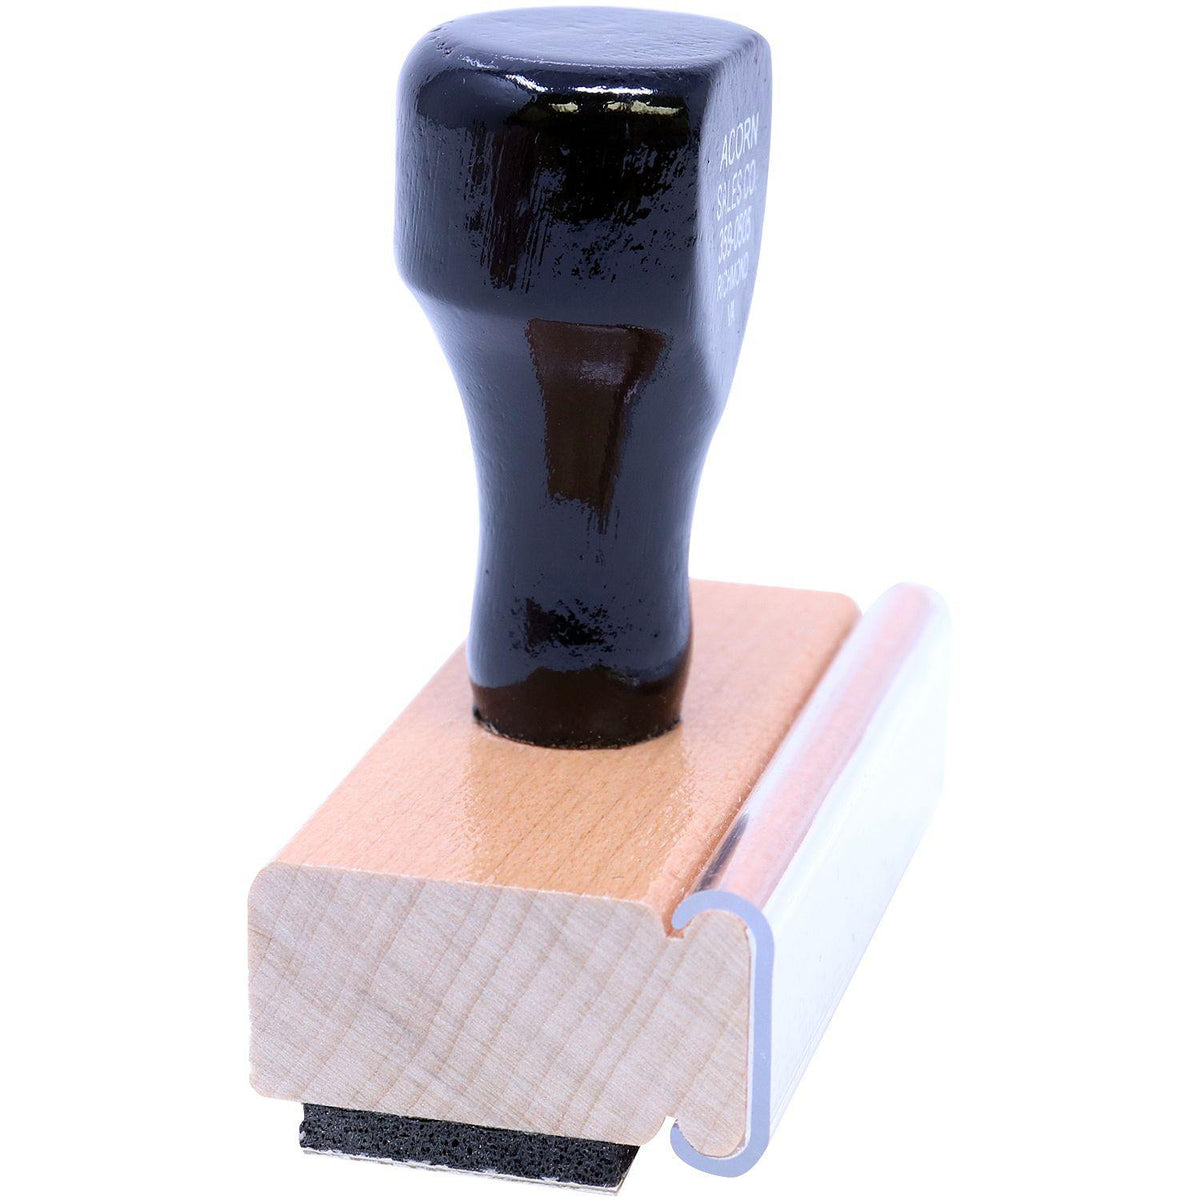 Side View of Large Allergic To Penicillin Rubber Stamp at an Angle